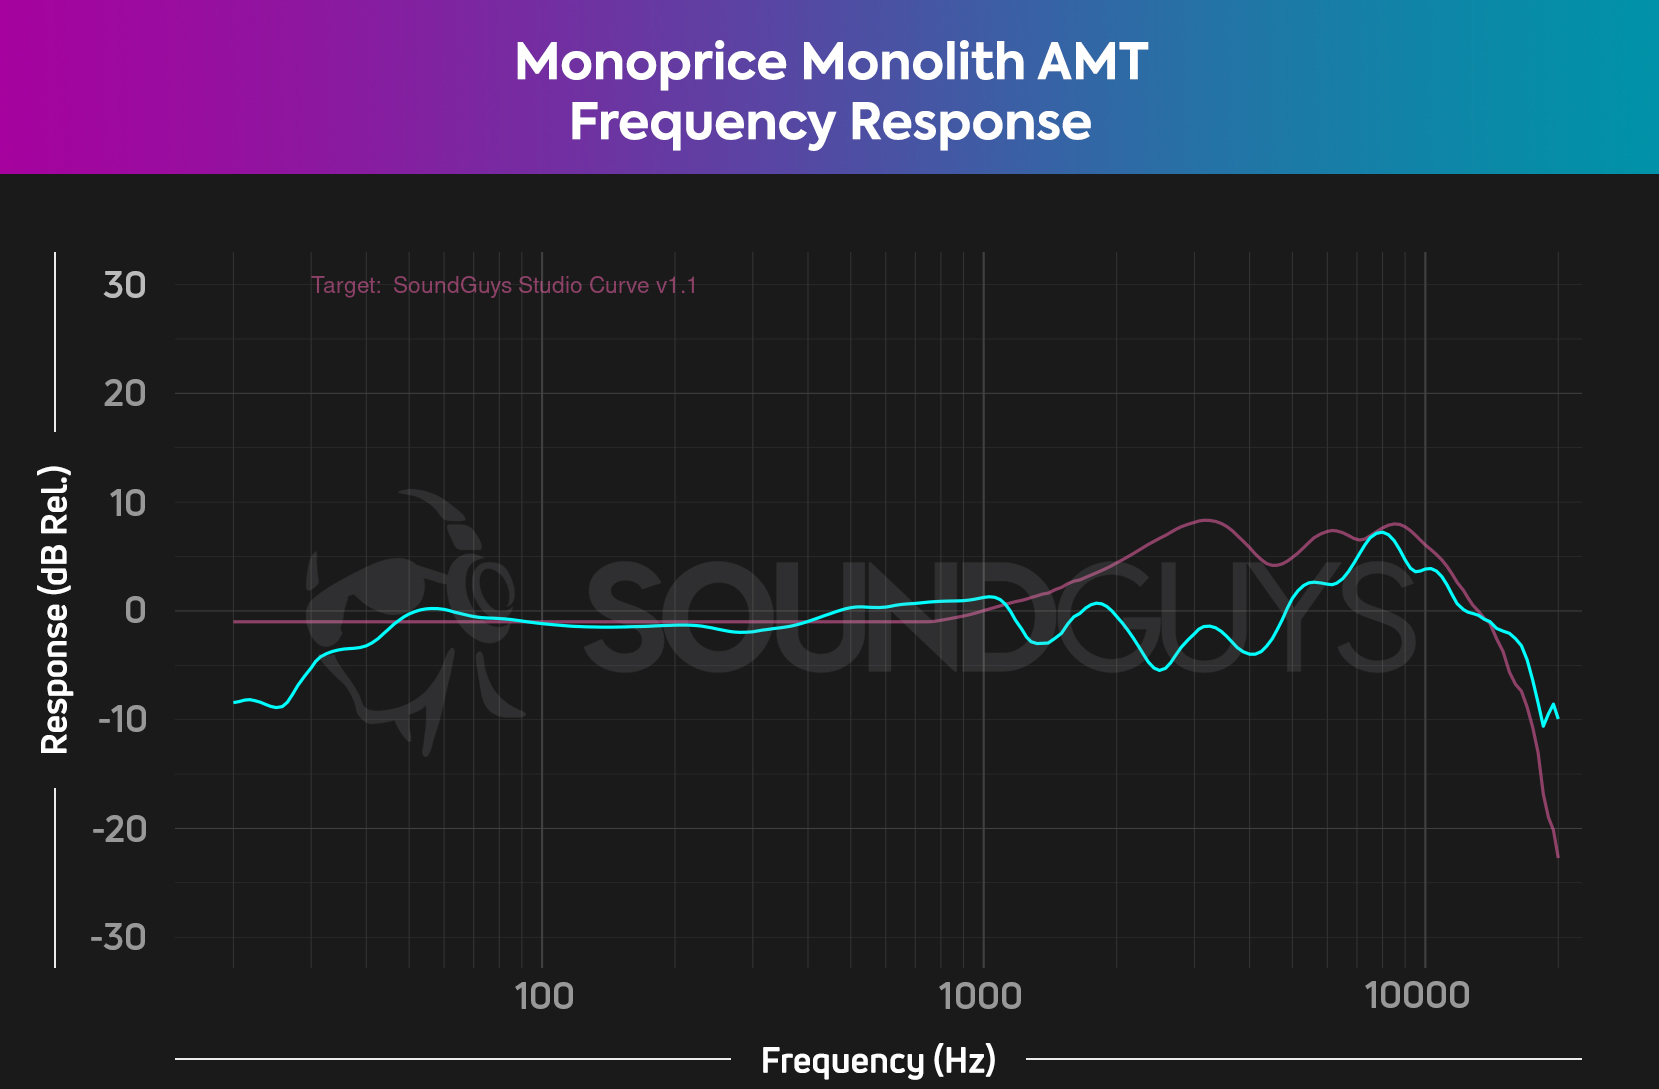 A chart showing the extremely flat frequency response of the Monoprice Monolith AMT overlaid on the SoundGuys studio curve v1.1.